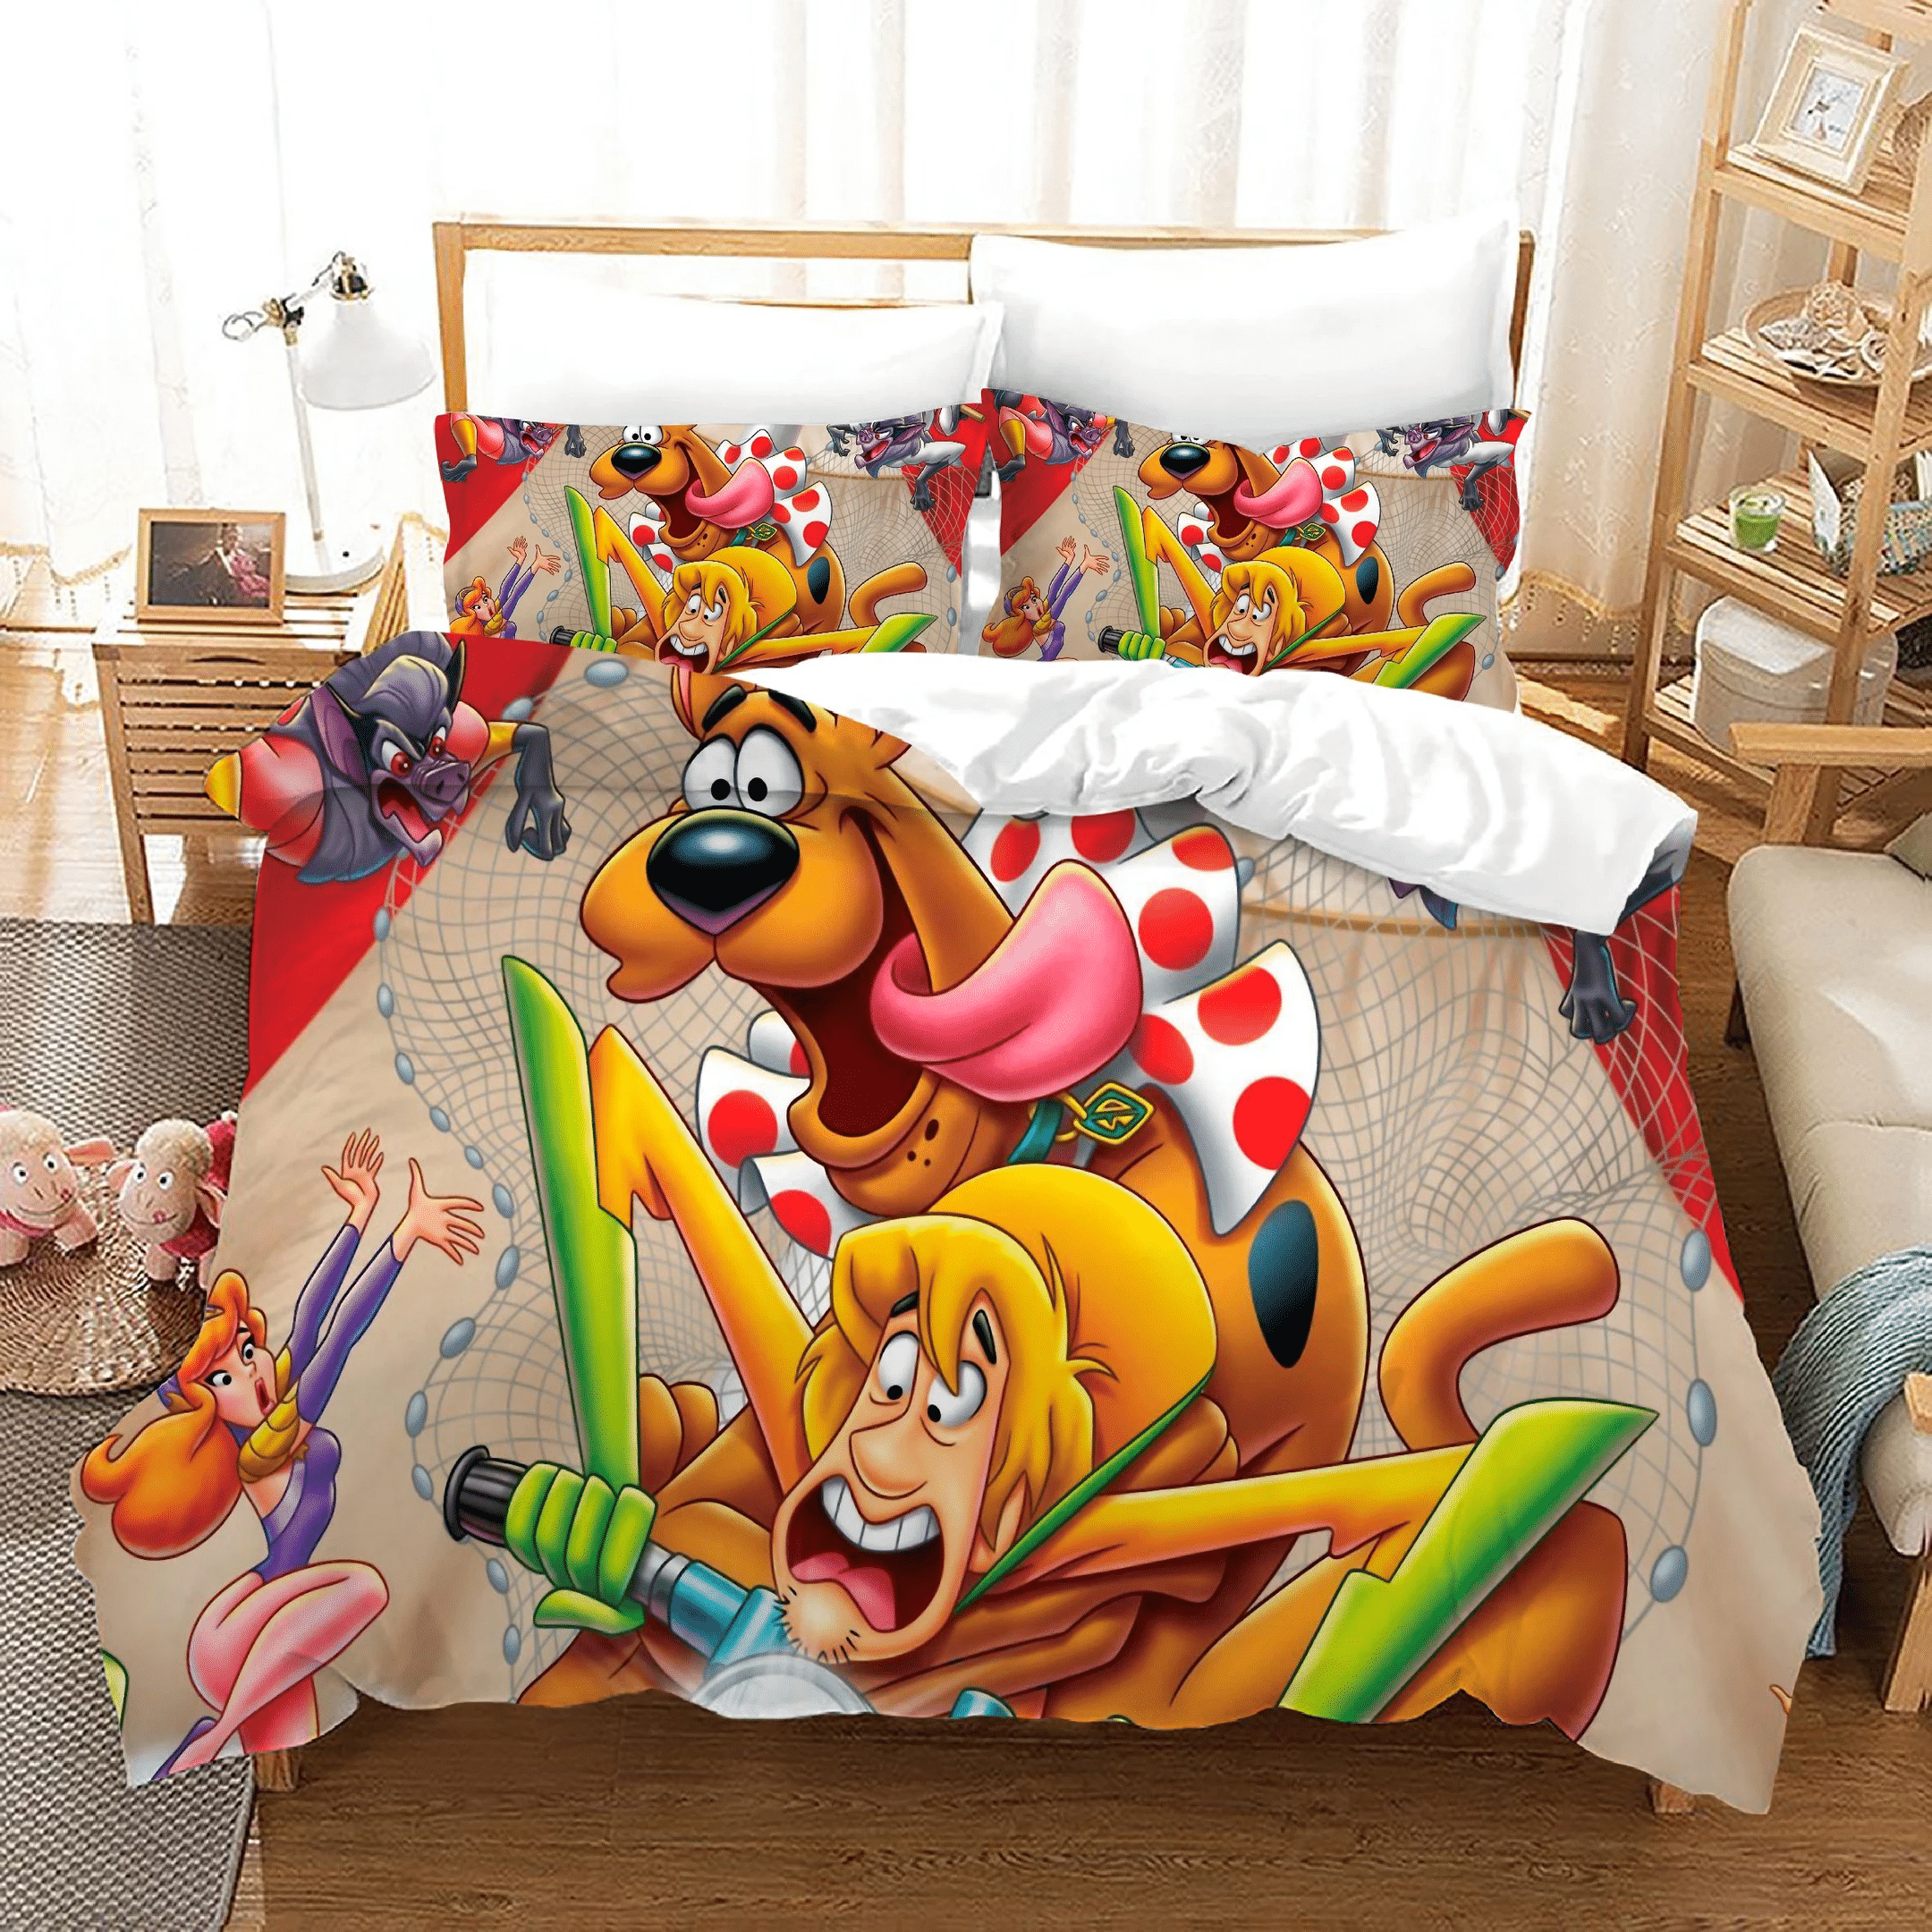 Scooby Doo 16 Duvet Cover Quilt Cover Pillowcase Bedding Sets